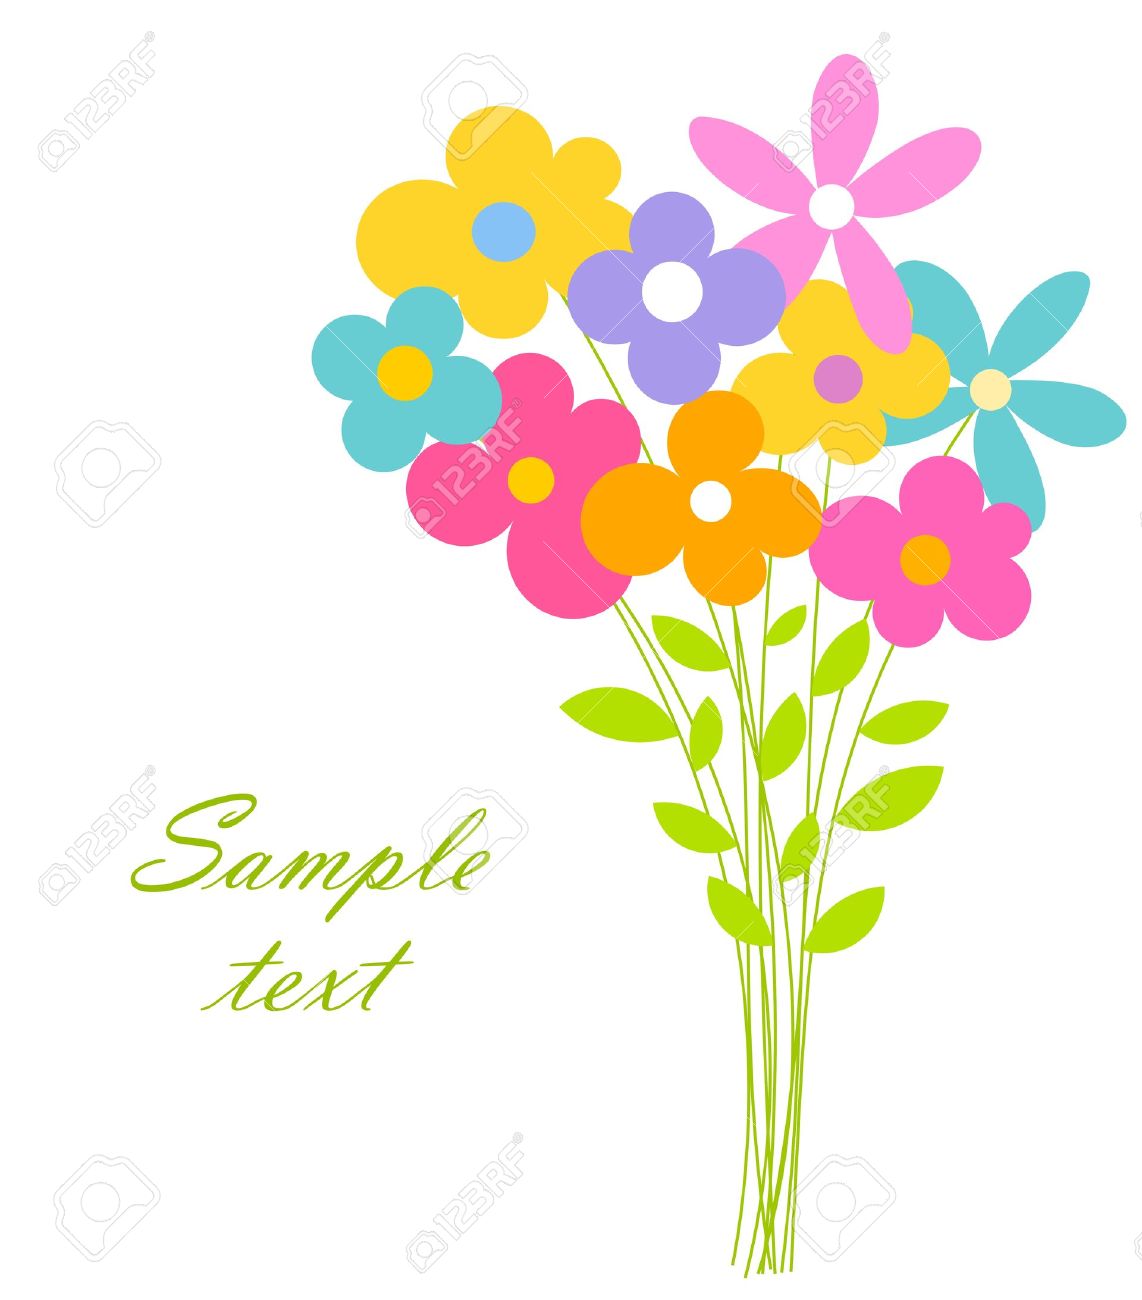 Row Of Flowers Clipart | Free download best Row Of Flowers Clipart on